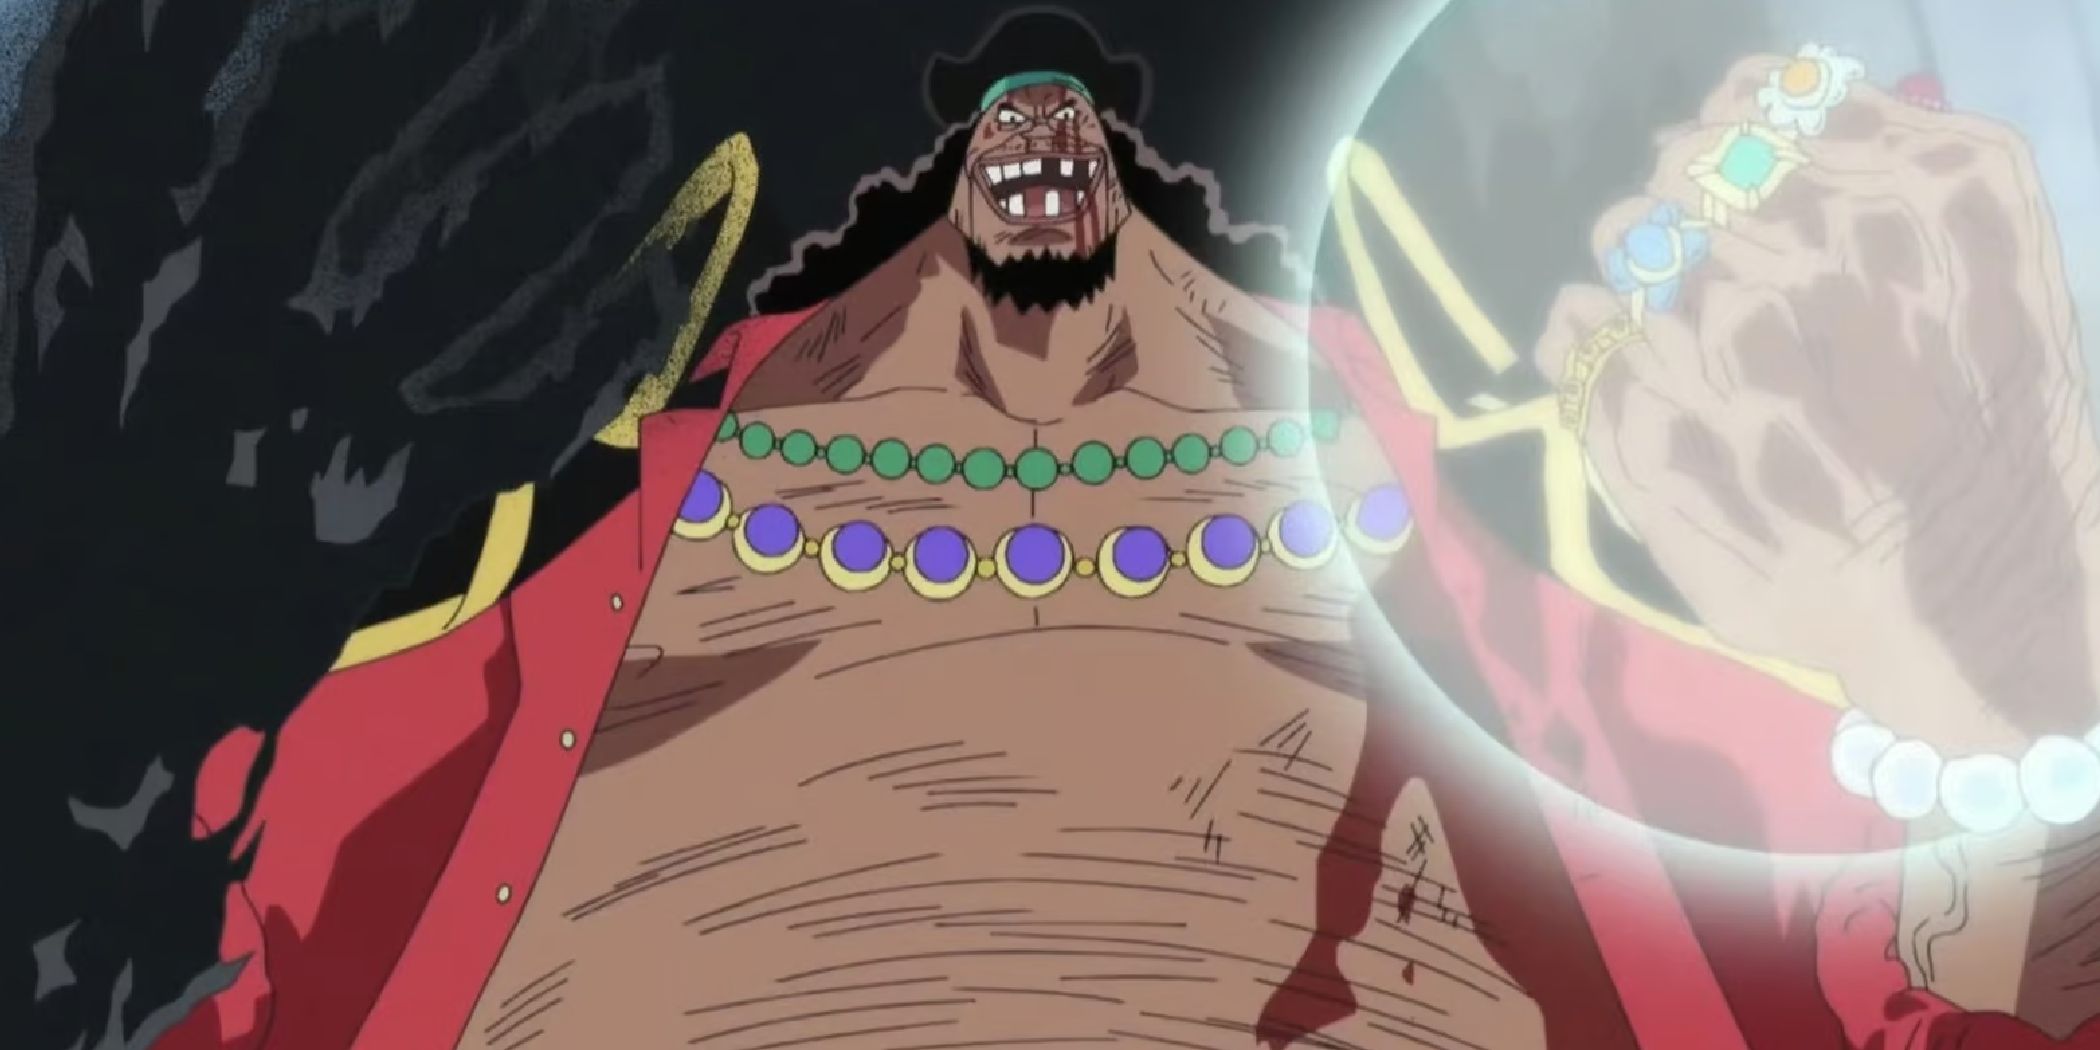 Blackbeard from One Piece using both his devil fruits